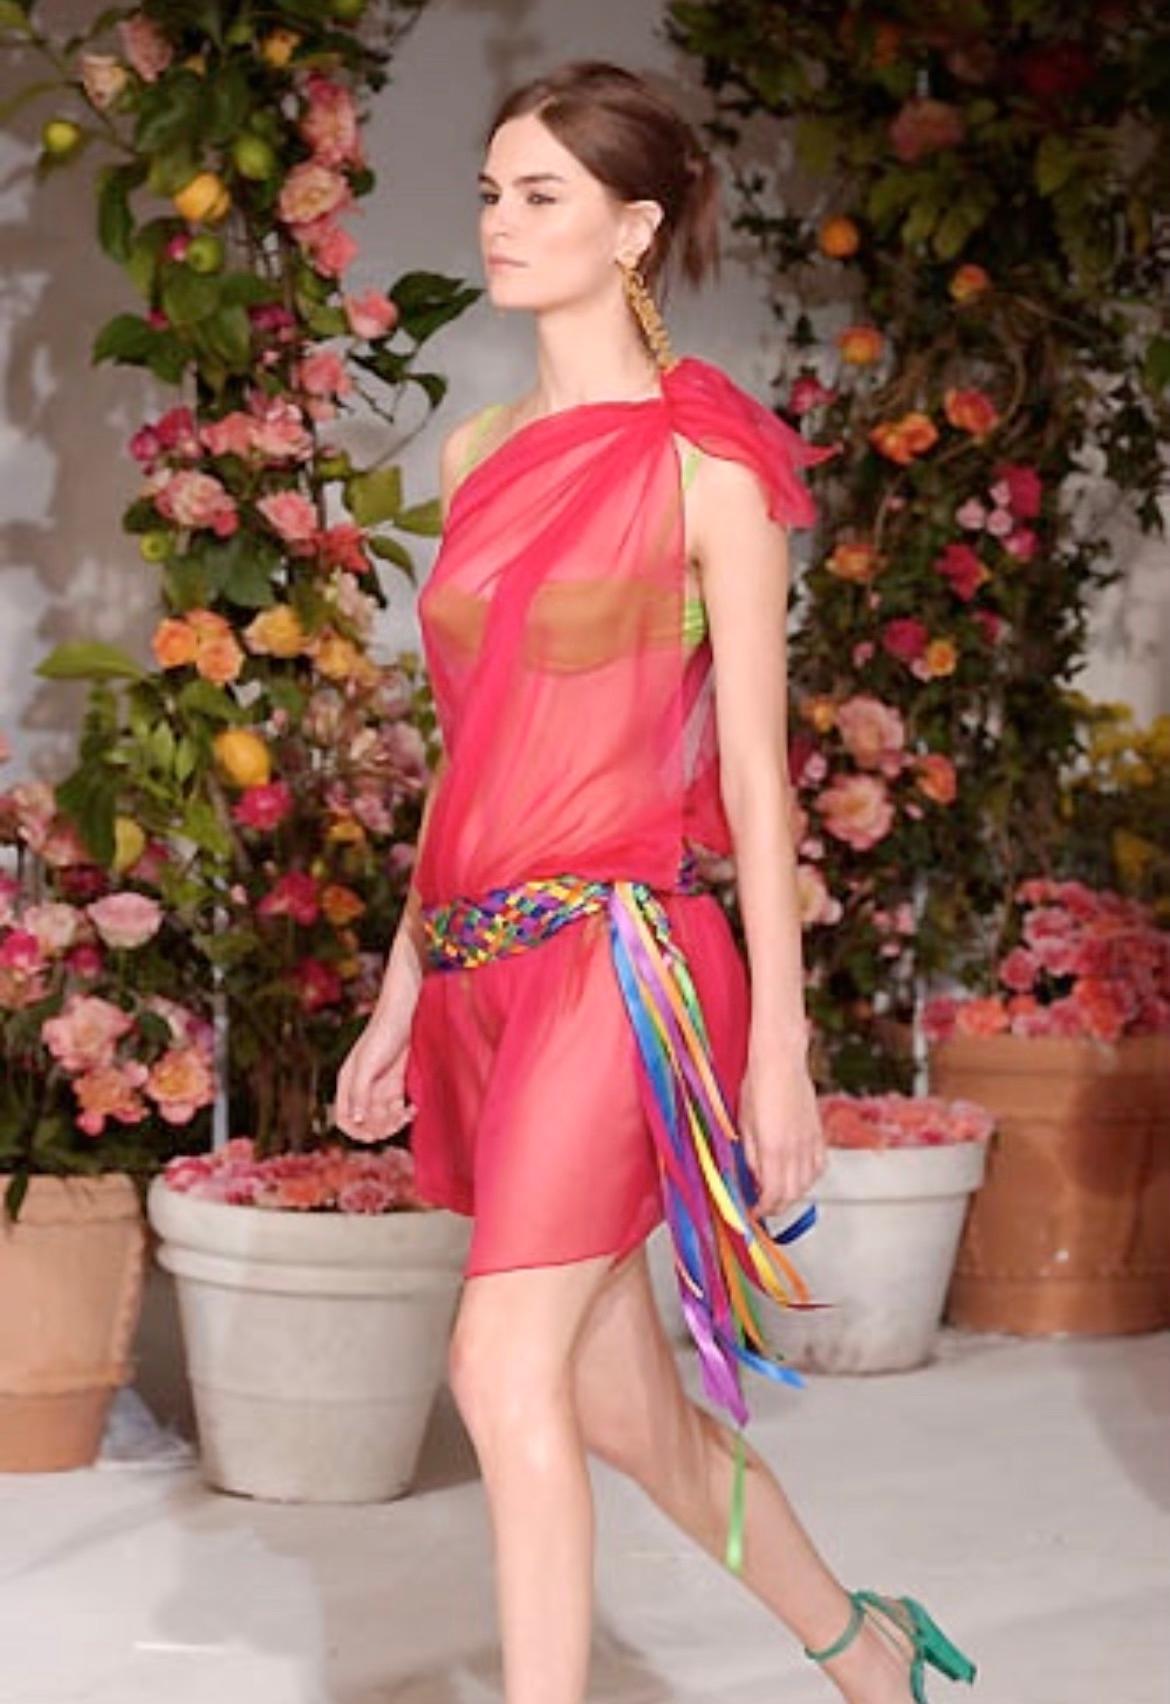 Presenting features a multicolor woven silk ribbon Dolce & Gabbana waist belt. From the Spring/Summer 2002 collection, this belt debuted on the season's runway as part of look 53, modeled by Maggie Rizer. The wide belt is tied with a knot and is